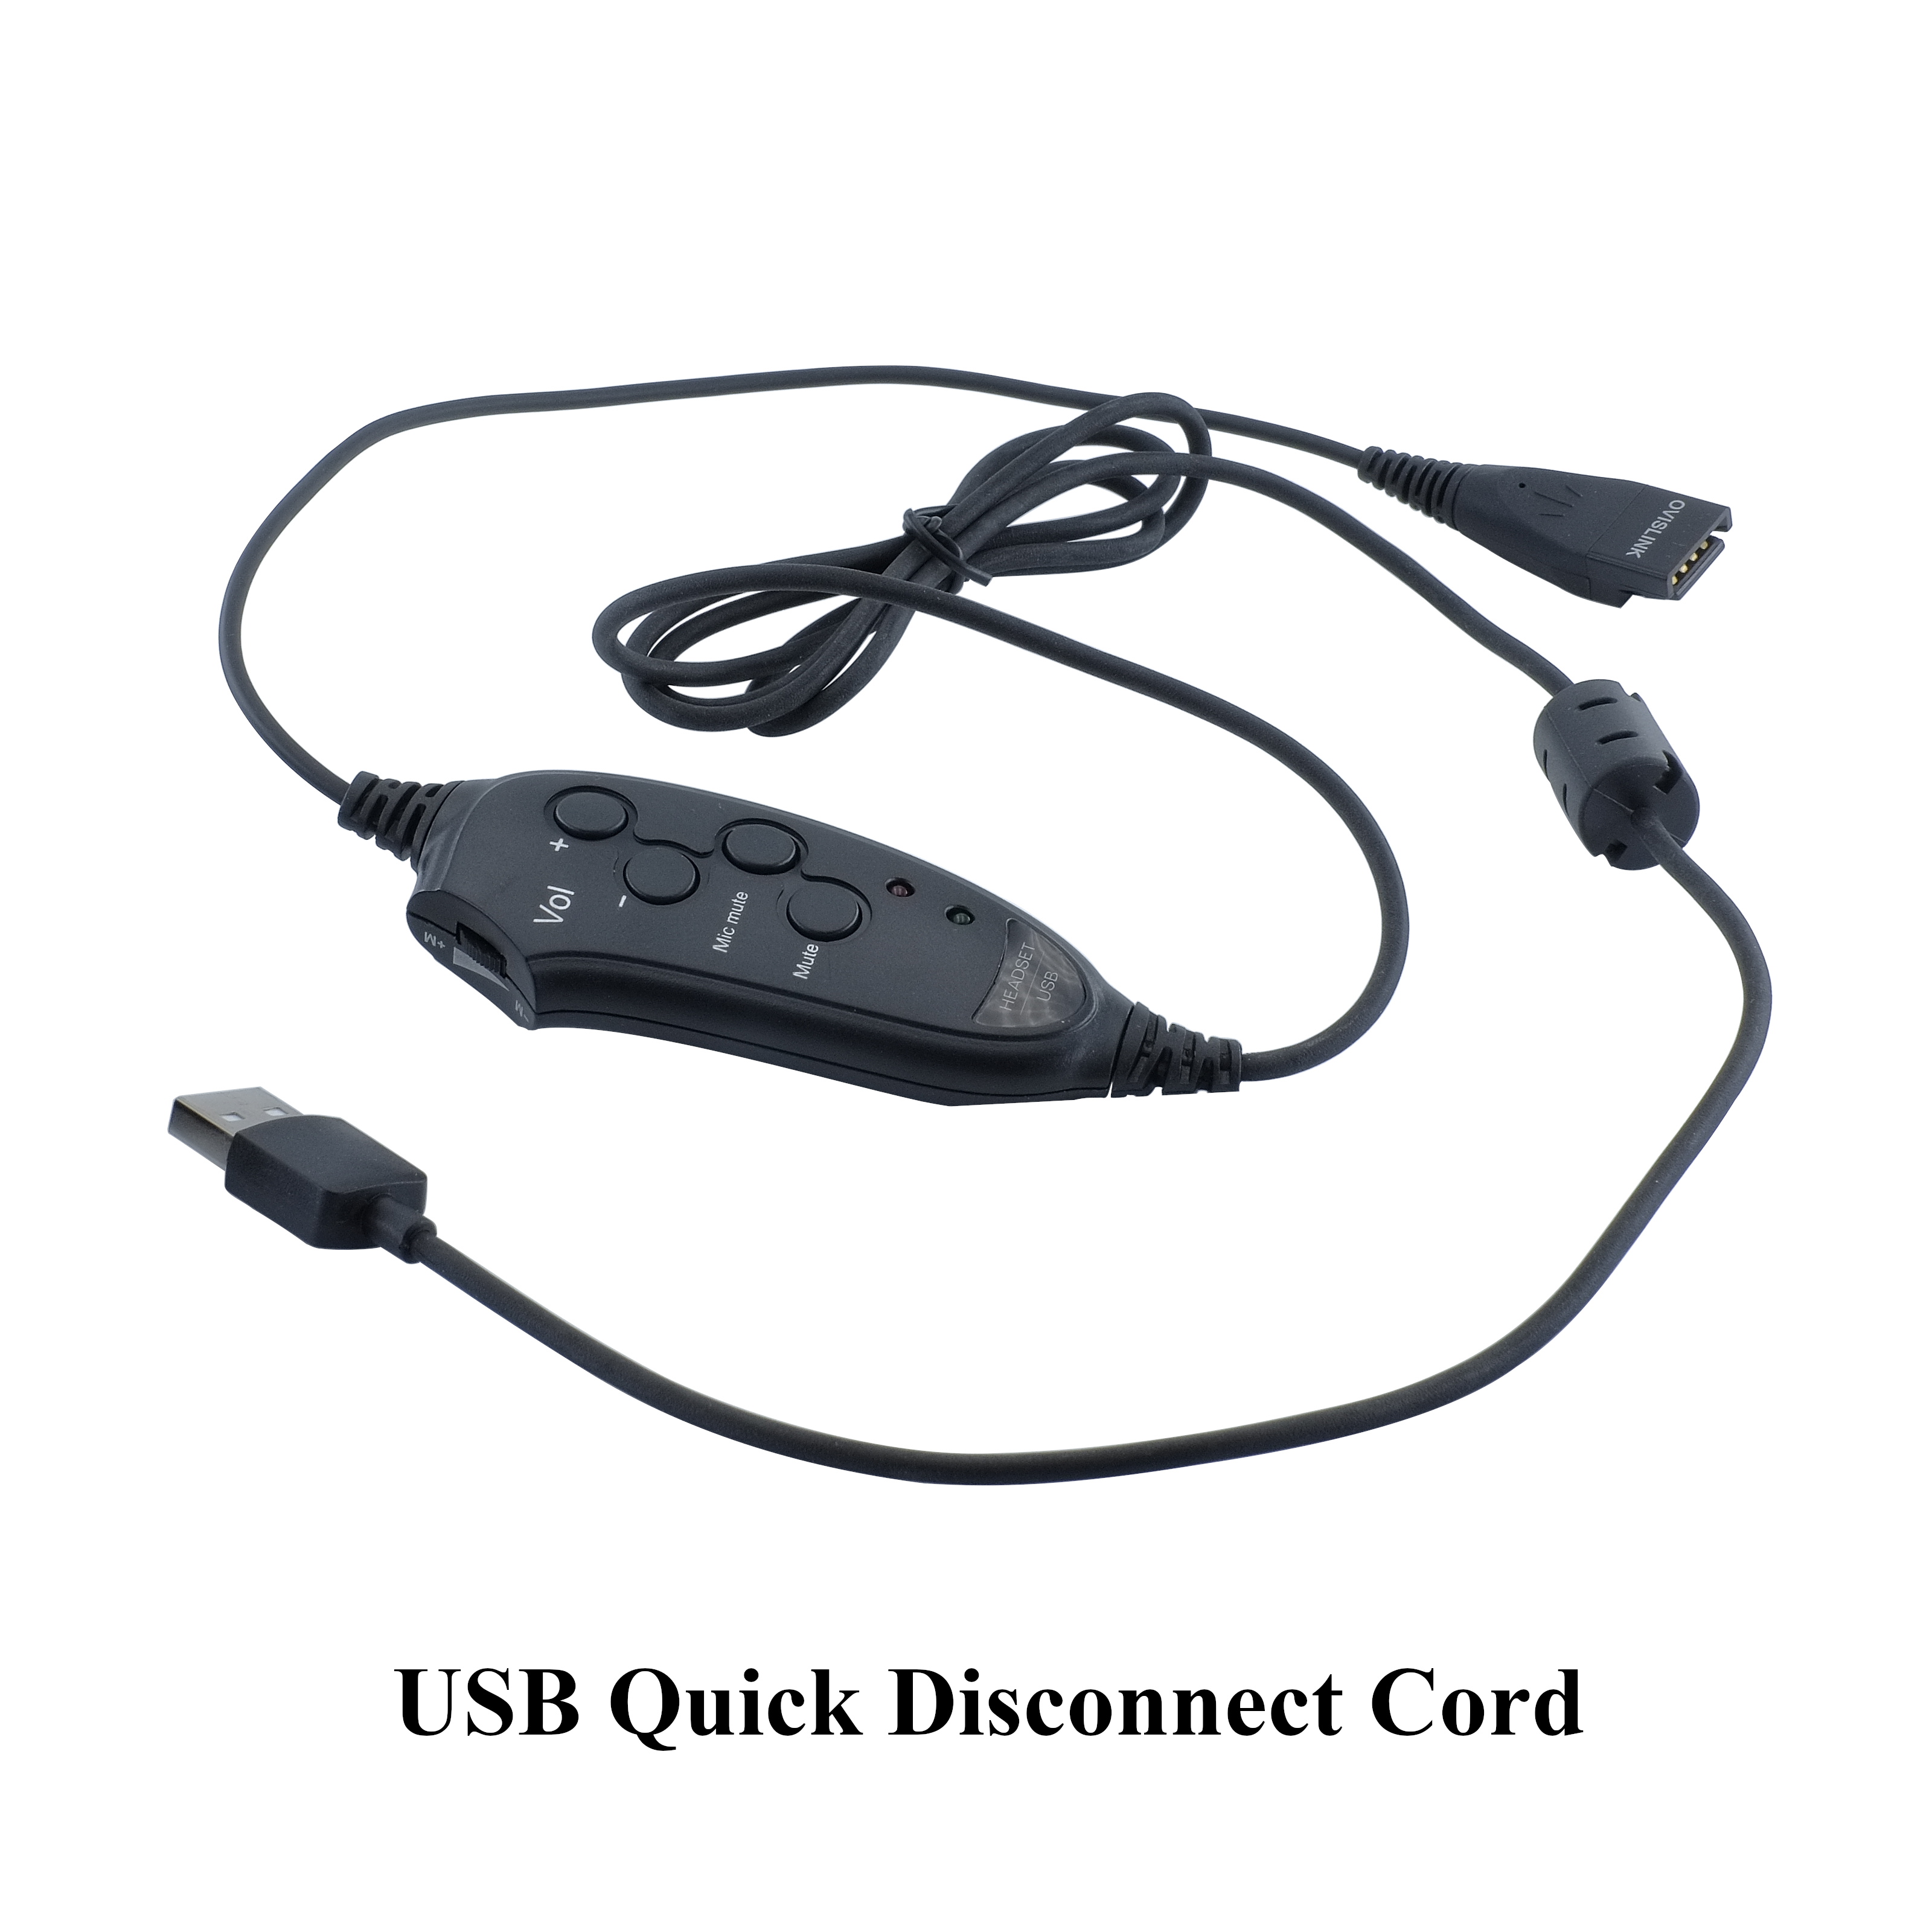 OvisLink Headset USB Quick Disconnect Cord